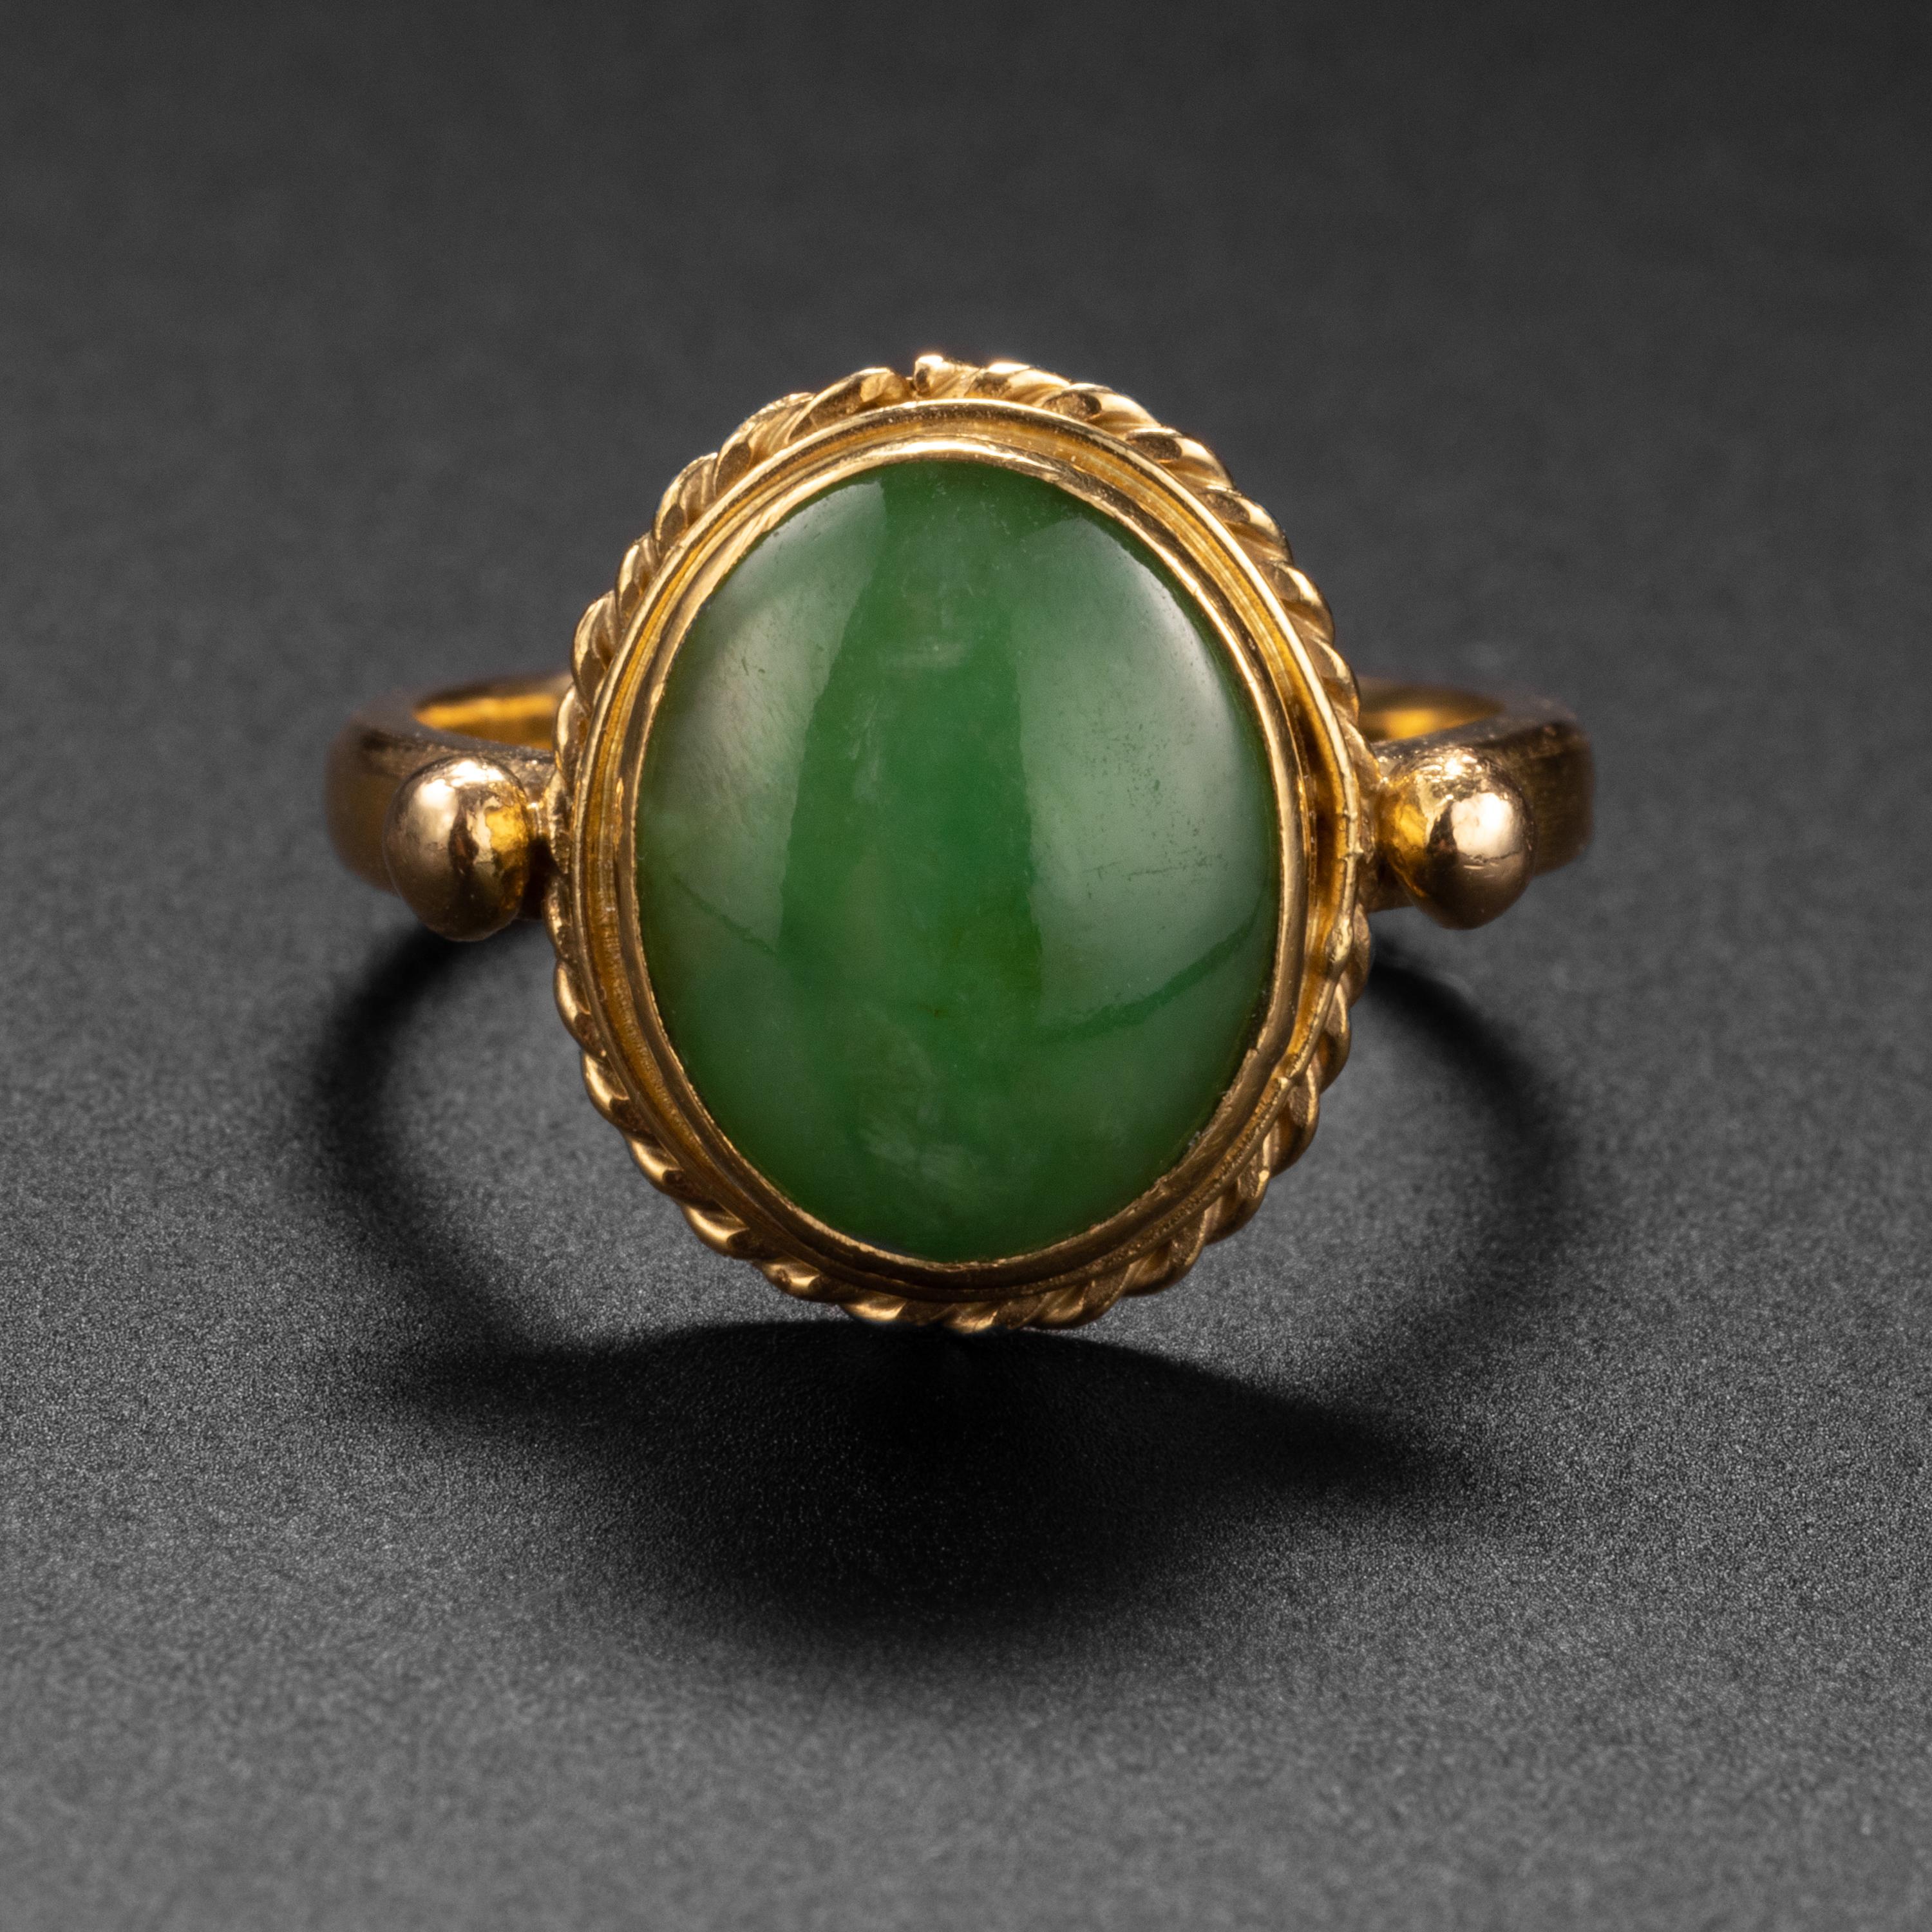 This vintage (circa 1980s) ring was hand-crafted in luxurious 22K pure gold that has been bezel-set with a luscious apple-green cabochon of natural, untreated jadeite jade. The jade measures 10.01 x 8.2mm and is highly translucent, despite the